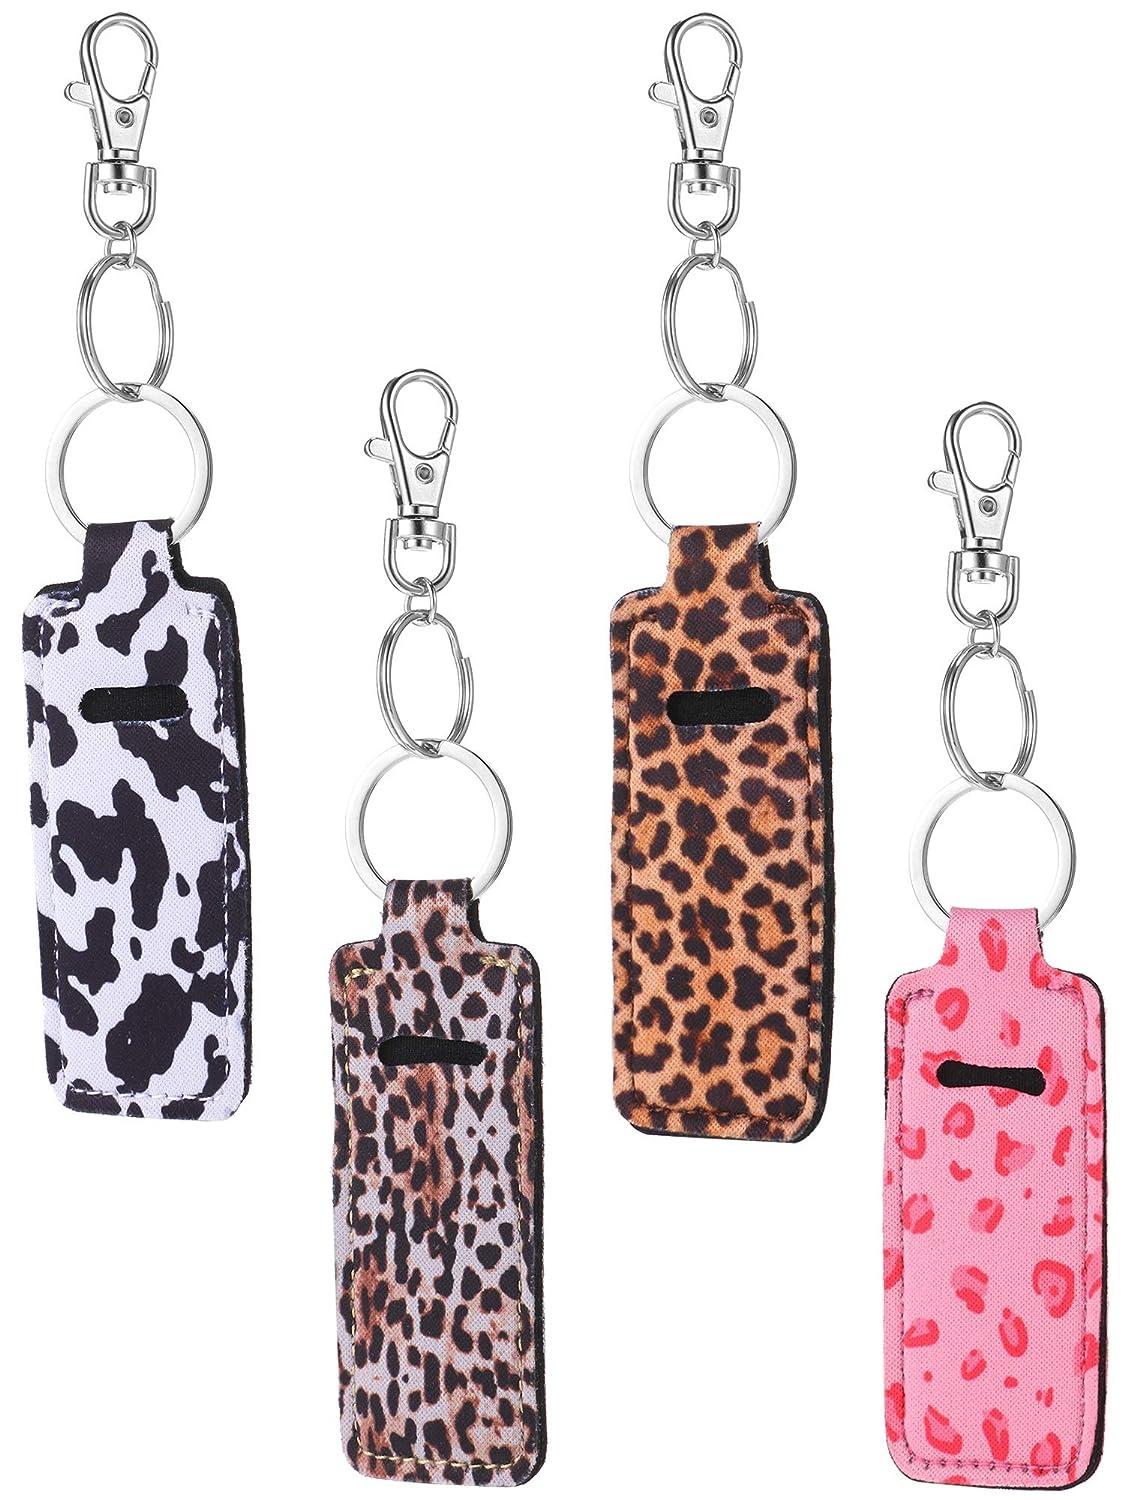  10 Pieces Cow Print Lipstick Holder Lipstick Holder Keychain  Sleeve Lipstick Pouch Lip Balm Holder Sleeve with 10 Metal Key Chains to  hold Travel Daily Accessories, Leopard Style : Beauty